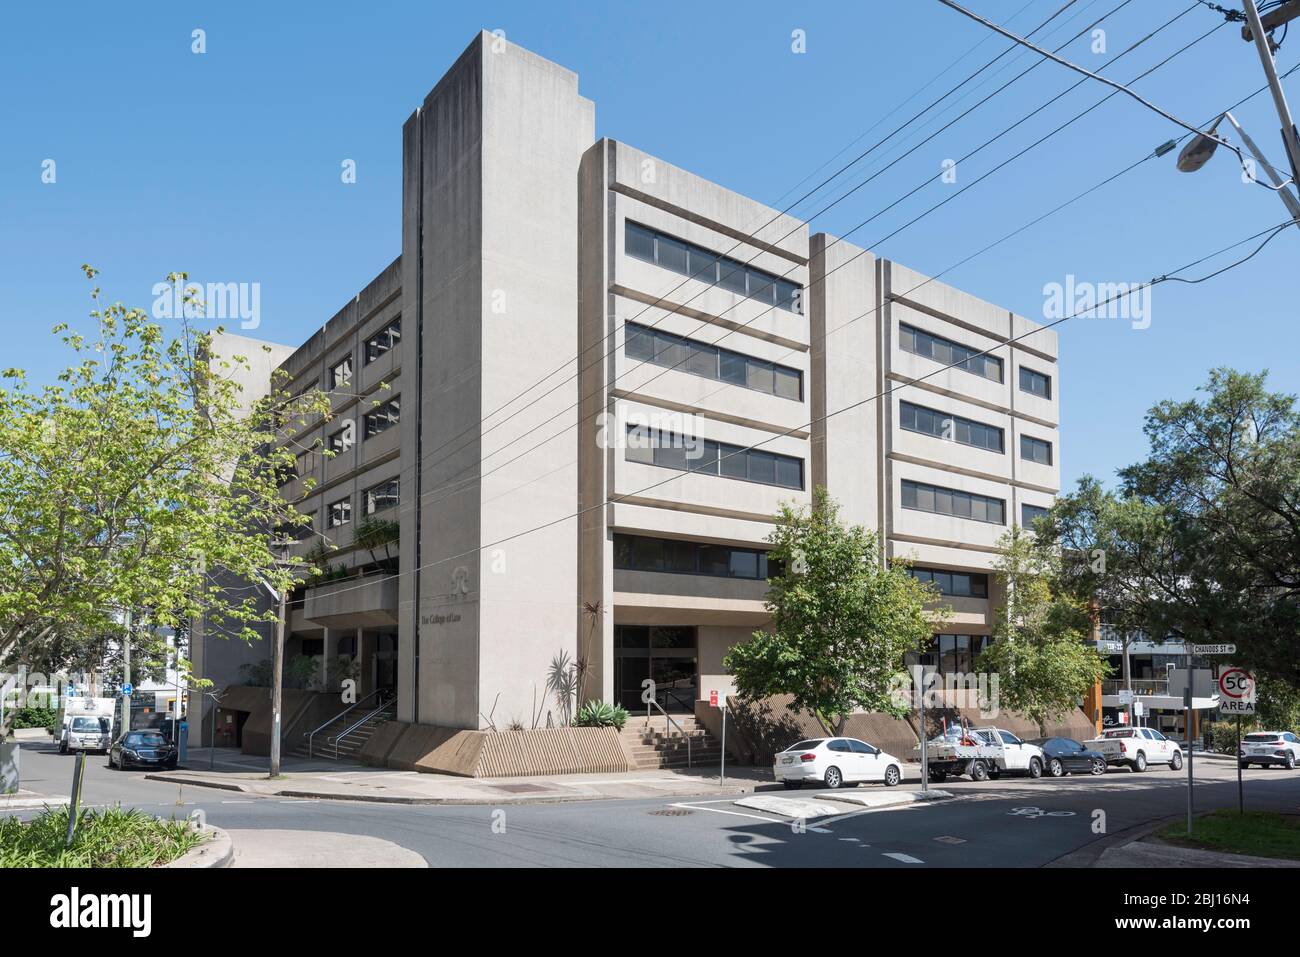 The 1976 constructed College of Law building in Chandos Street, St Leonards in northern Sydney, Australia. A good example of Brutalist architecture Stock Photo